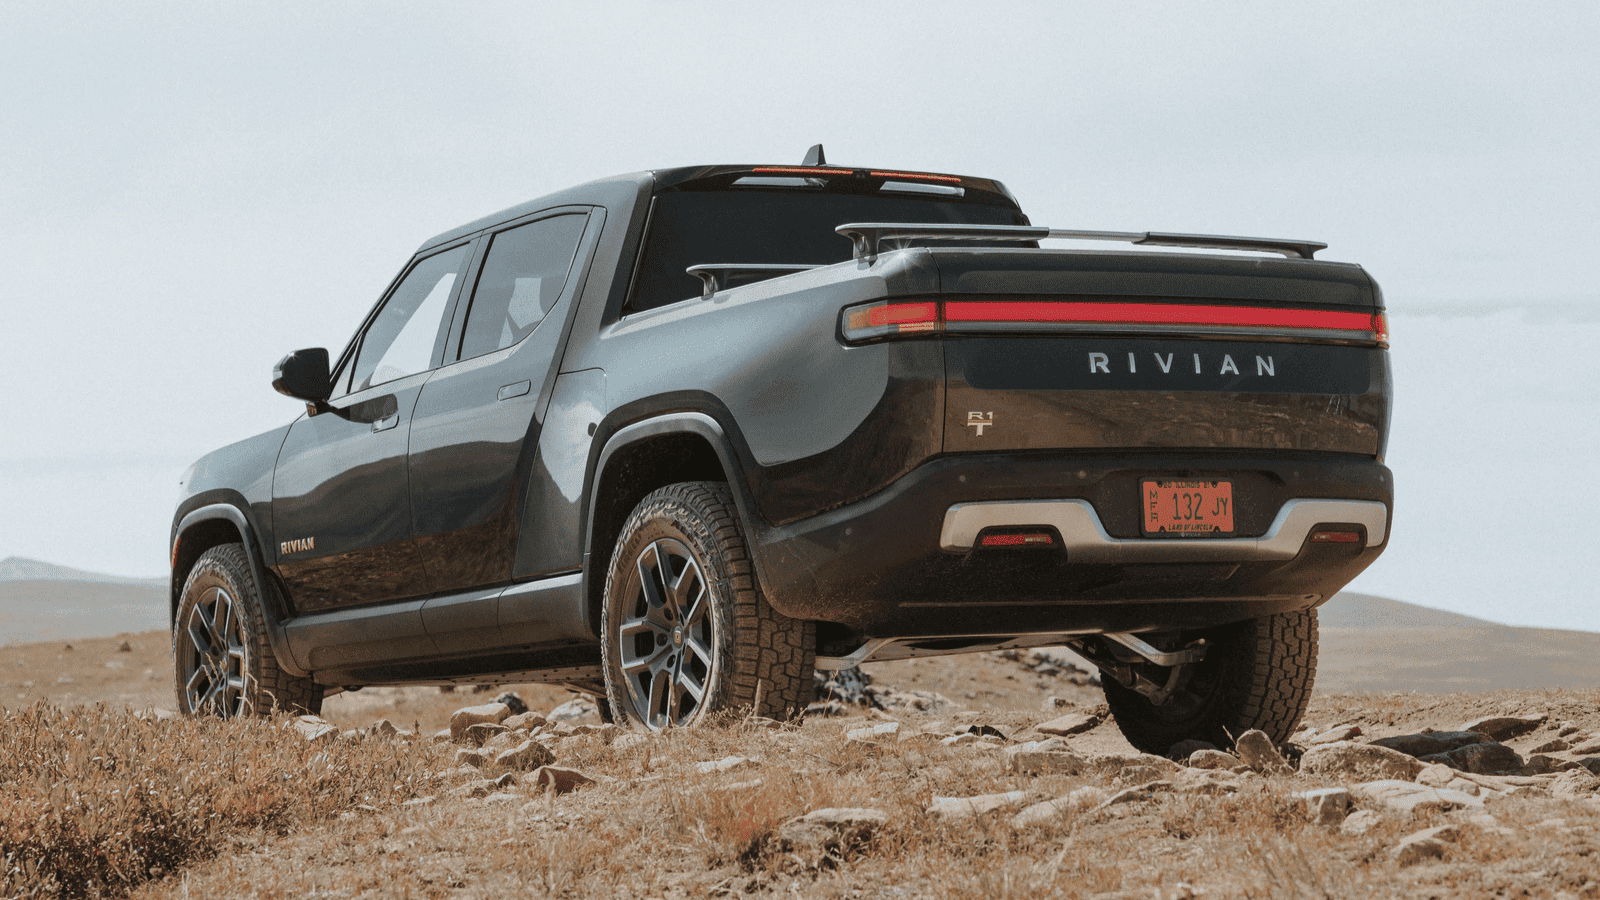 Rivian Powers the Future with Tesla's Supercharger Network and NACS